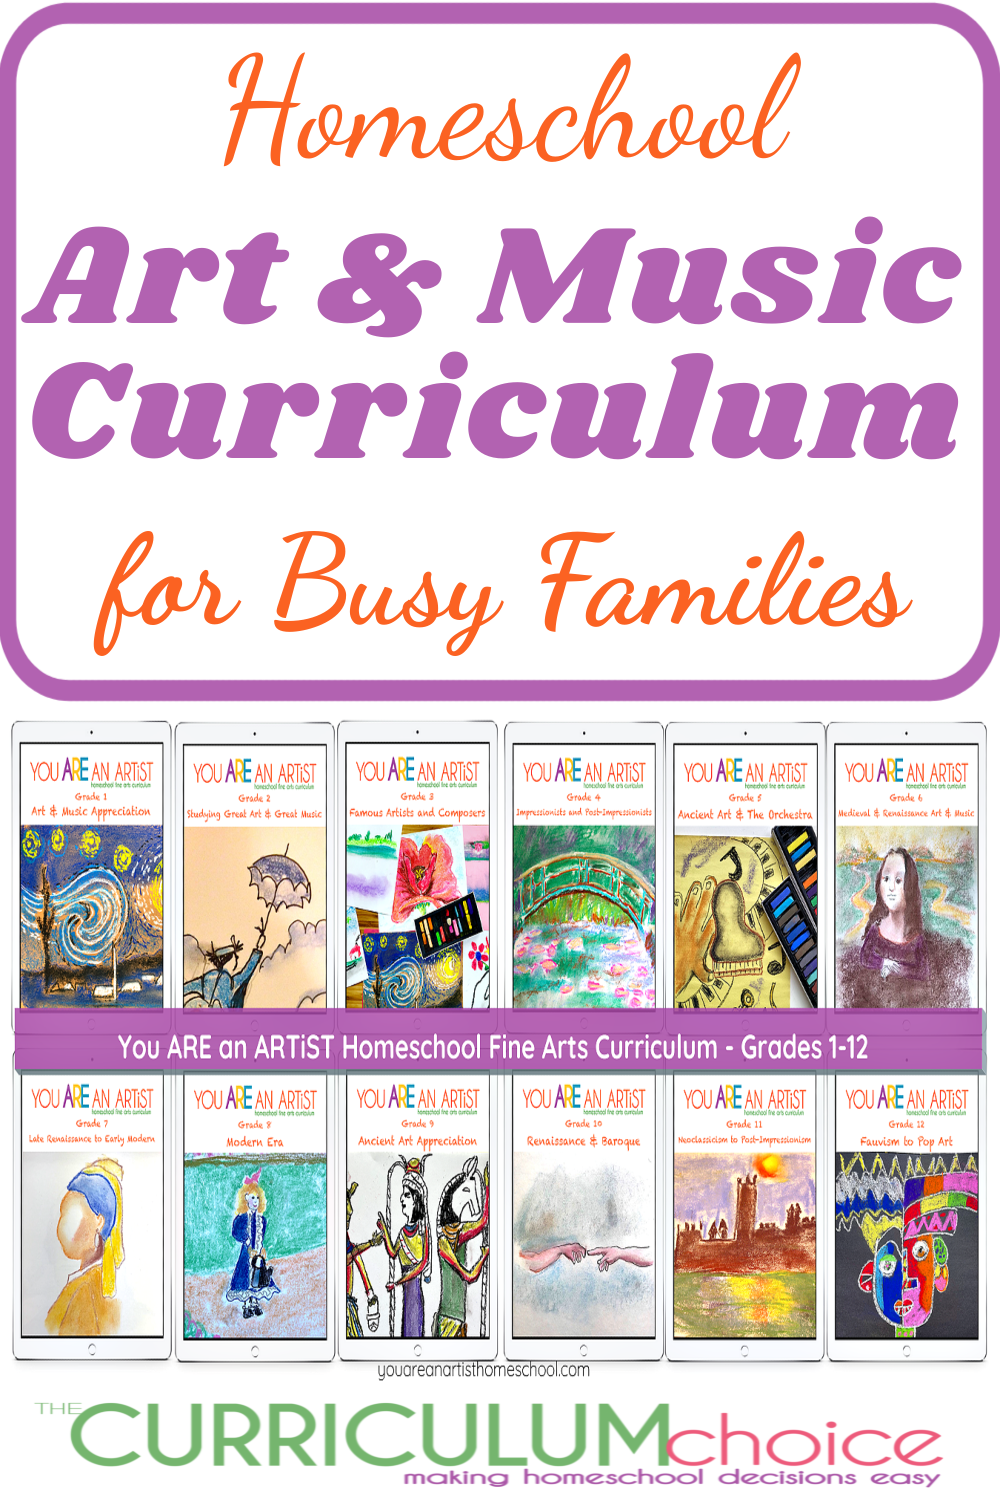 The Homeschool Art and Music Curriculum from You ARE An ARTiST organized art and music appreciation using a variety of resources so you can simply open the schedule and with little preparation you are off and learning! A review from The Curriculum Choice